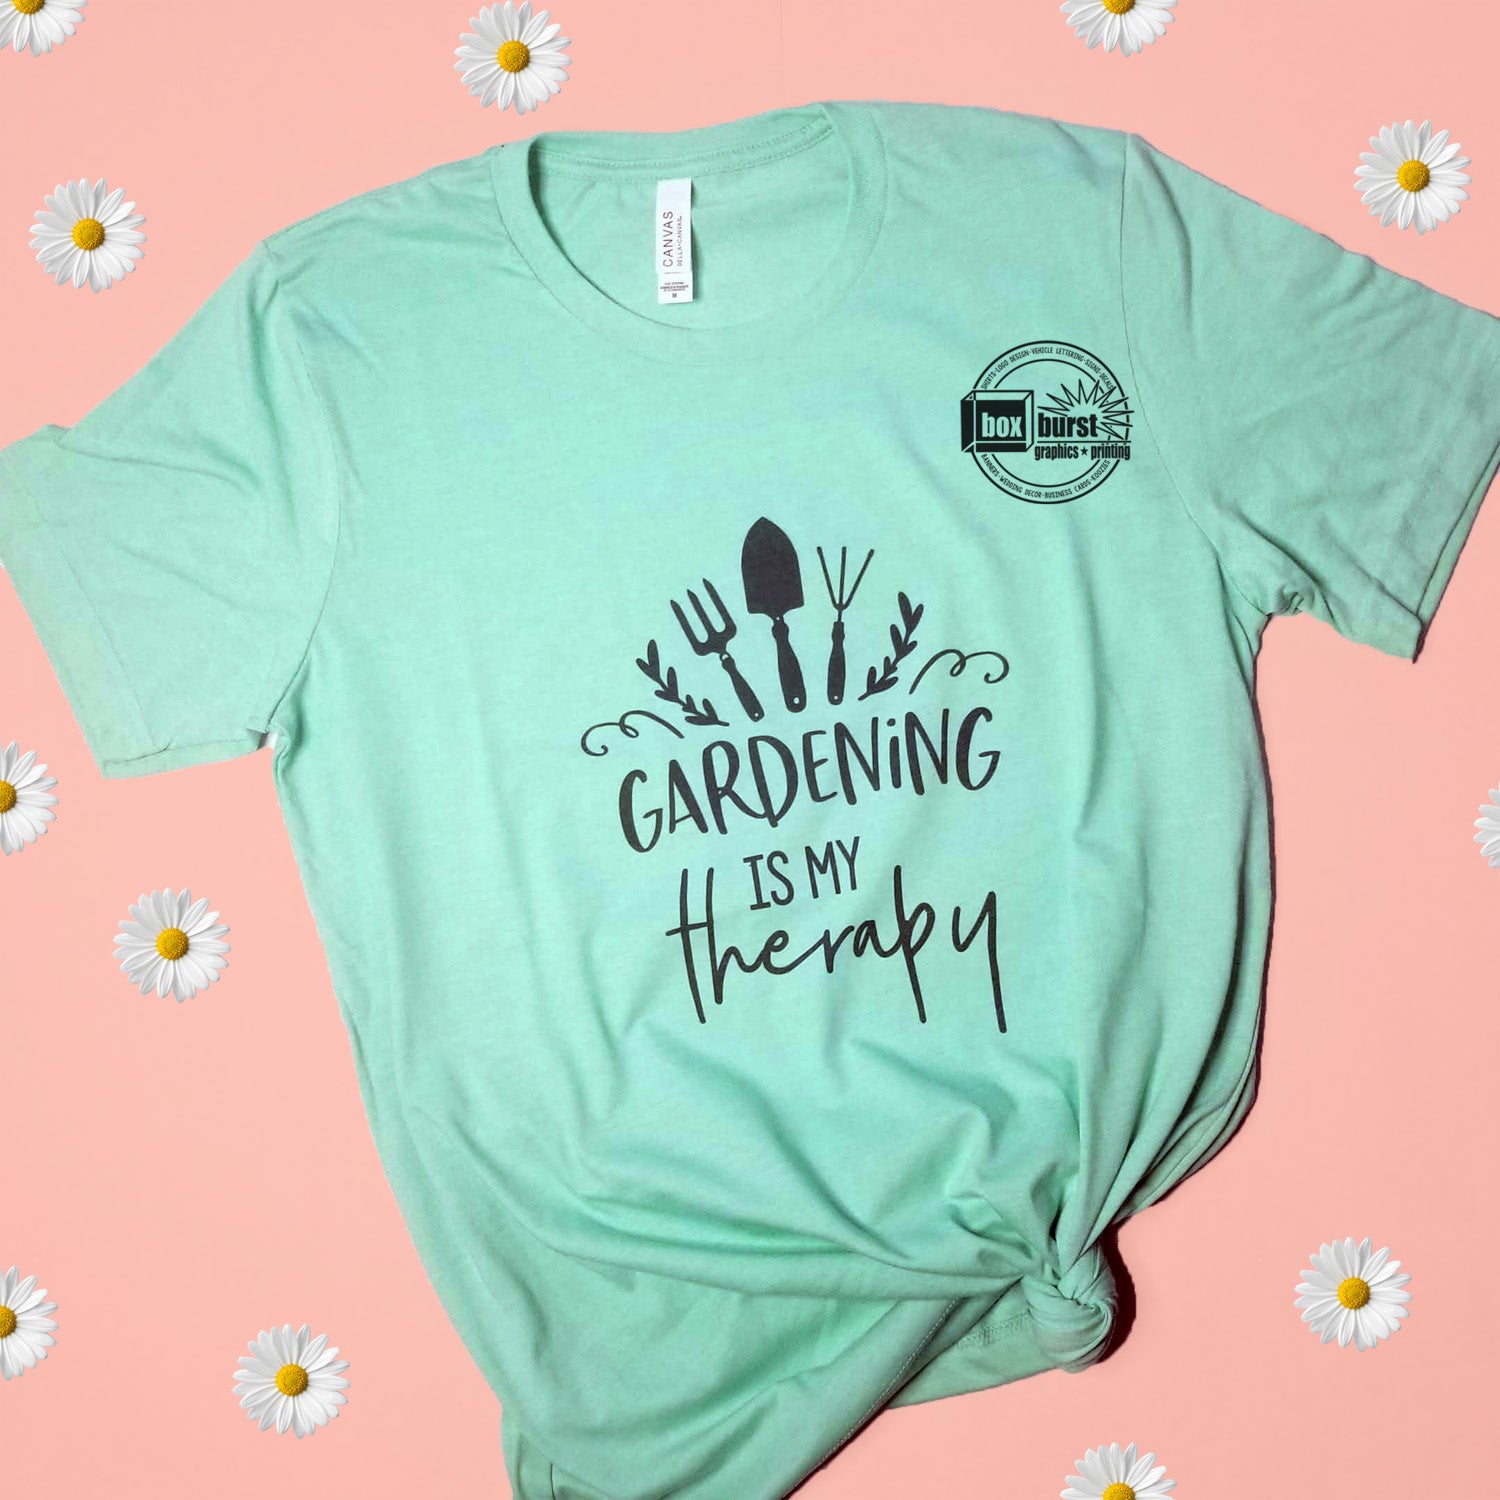 Gardening is my therapy graphic tee ink print